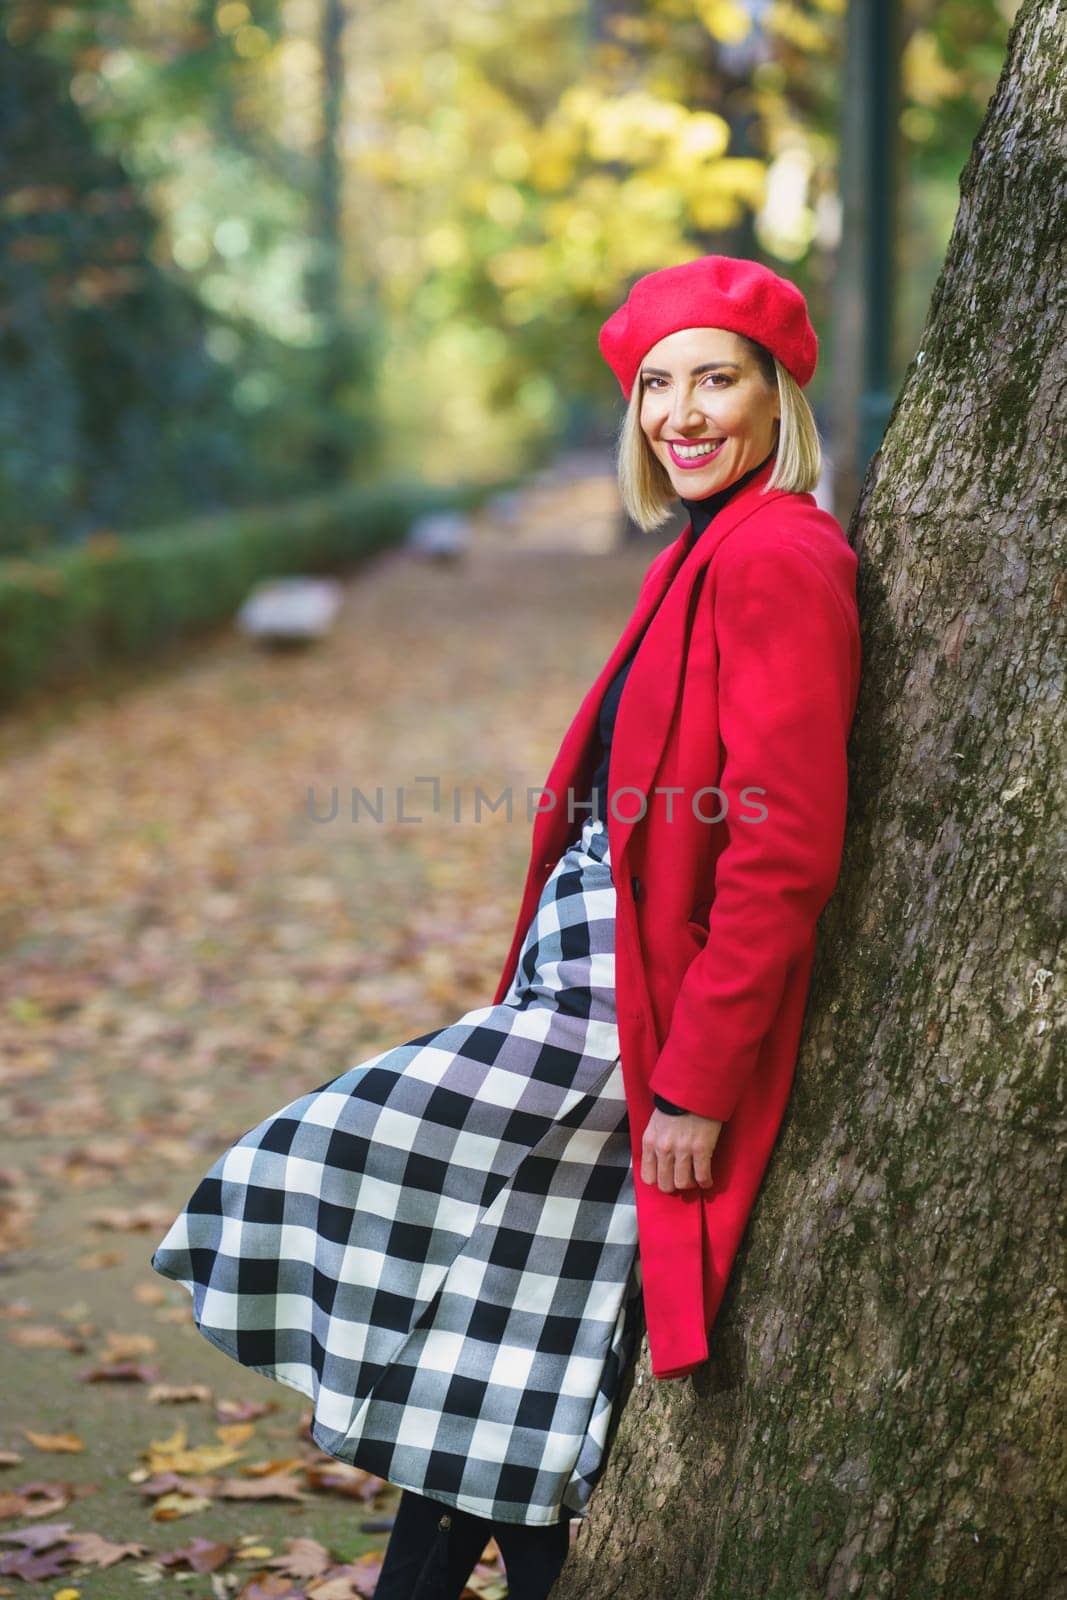 Smiling woman leaning on tree trunk in park by javiindy